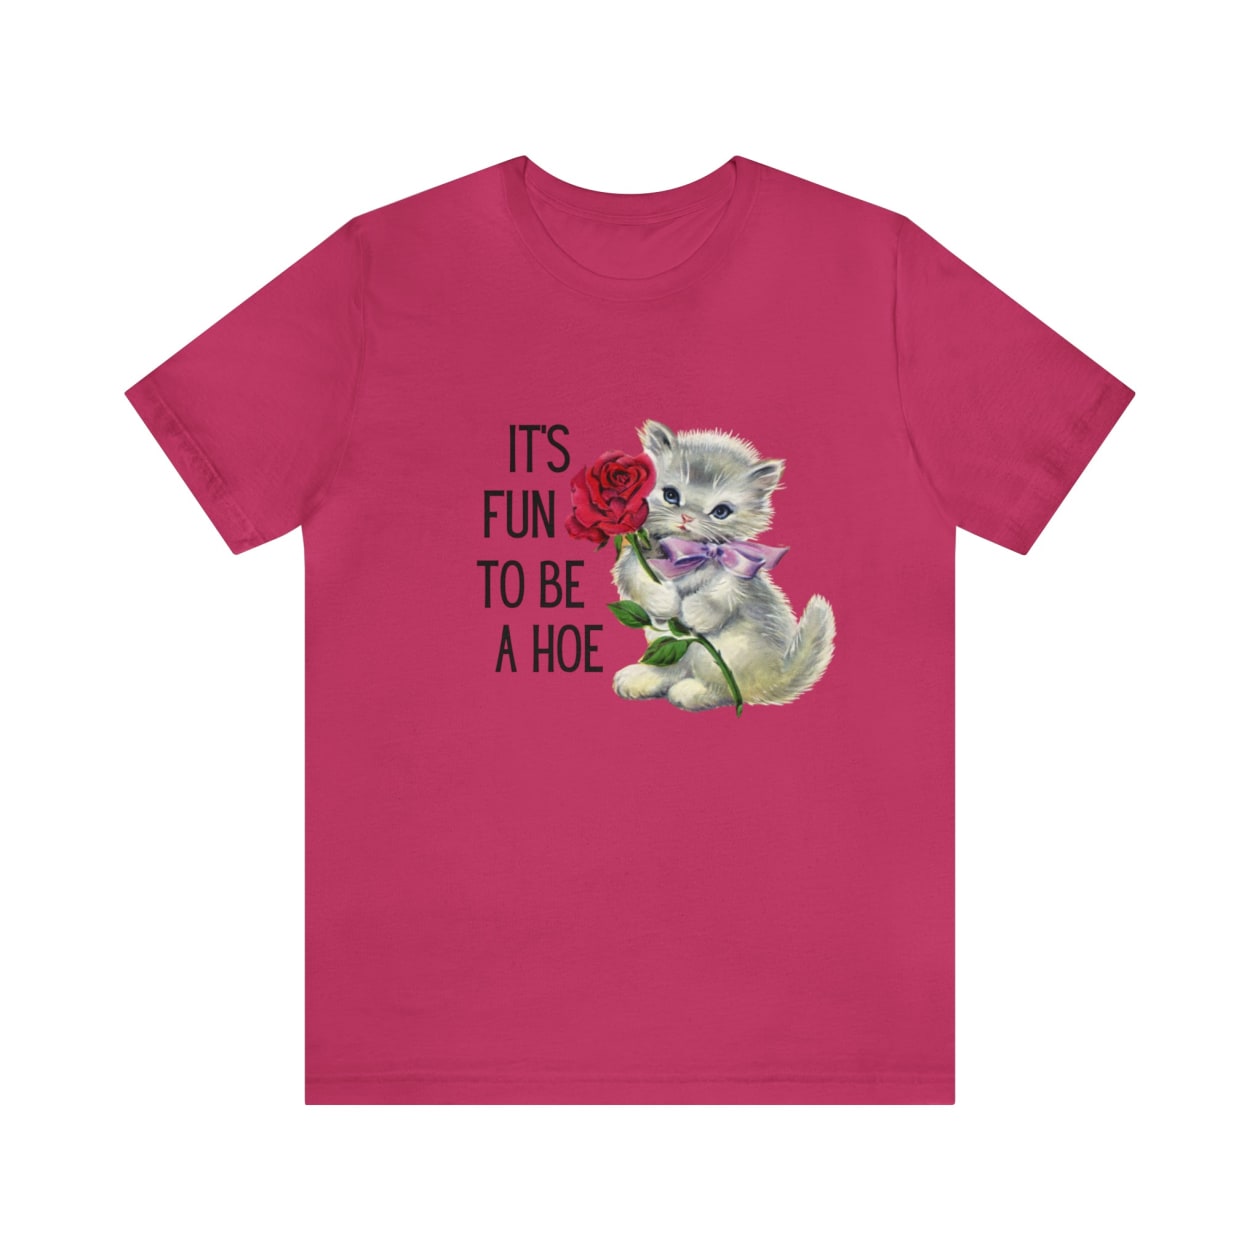 It's Fun to be a Hoe Jersey Short Sleeve Tee [Multiple Color Options] with Kitten Motif - Color: Berry, Size: S